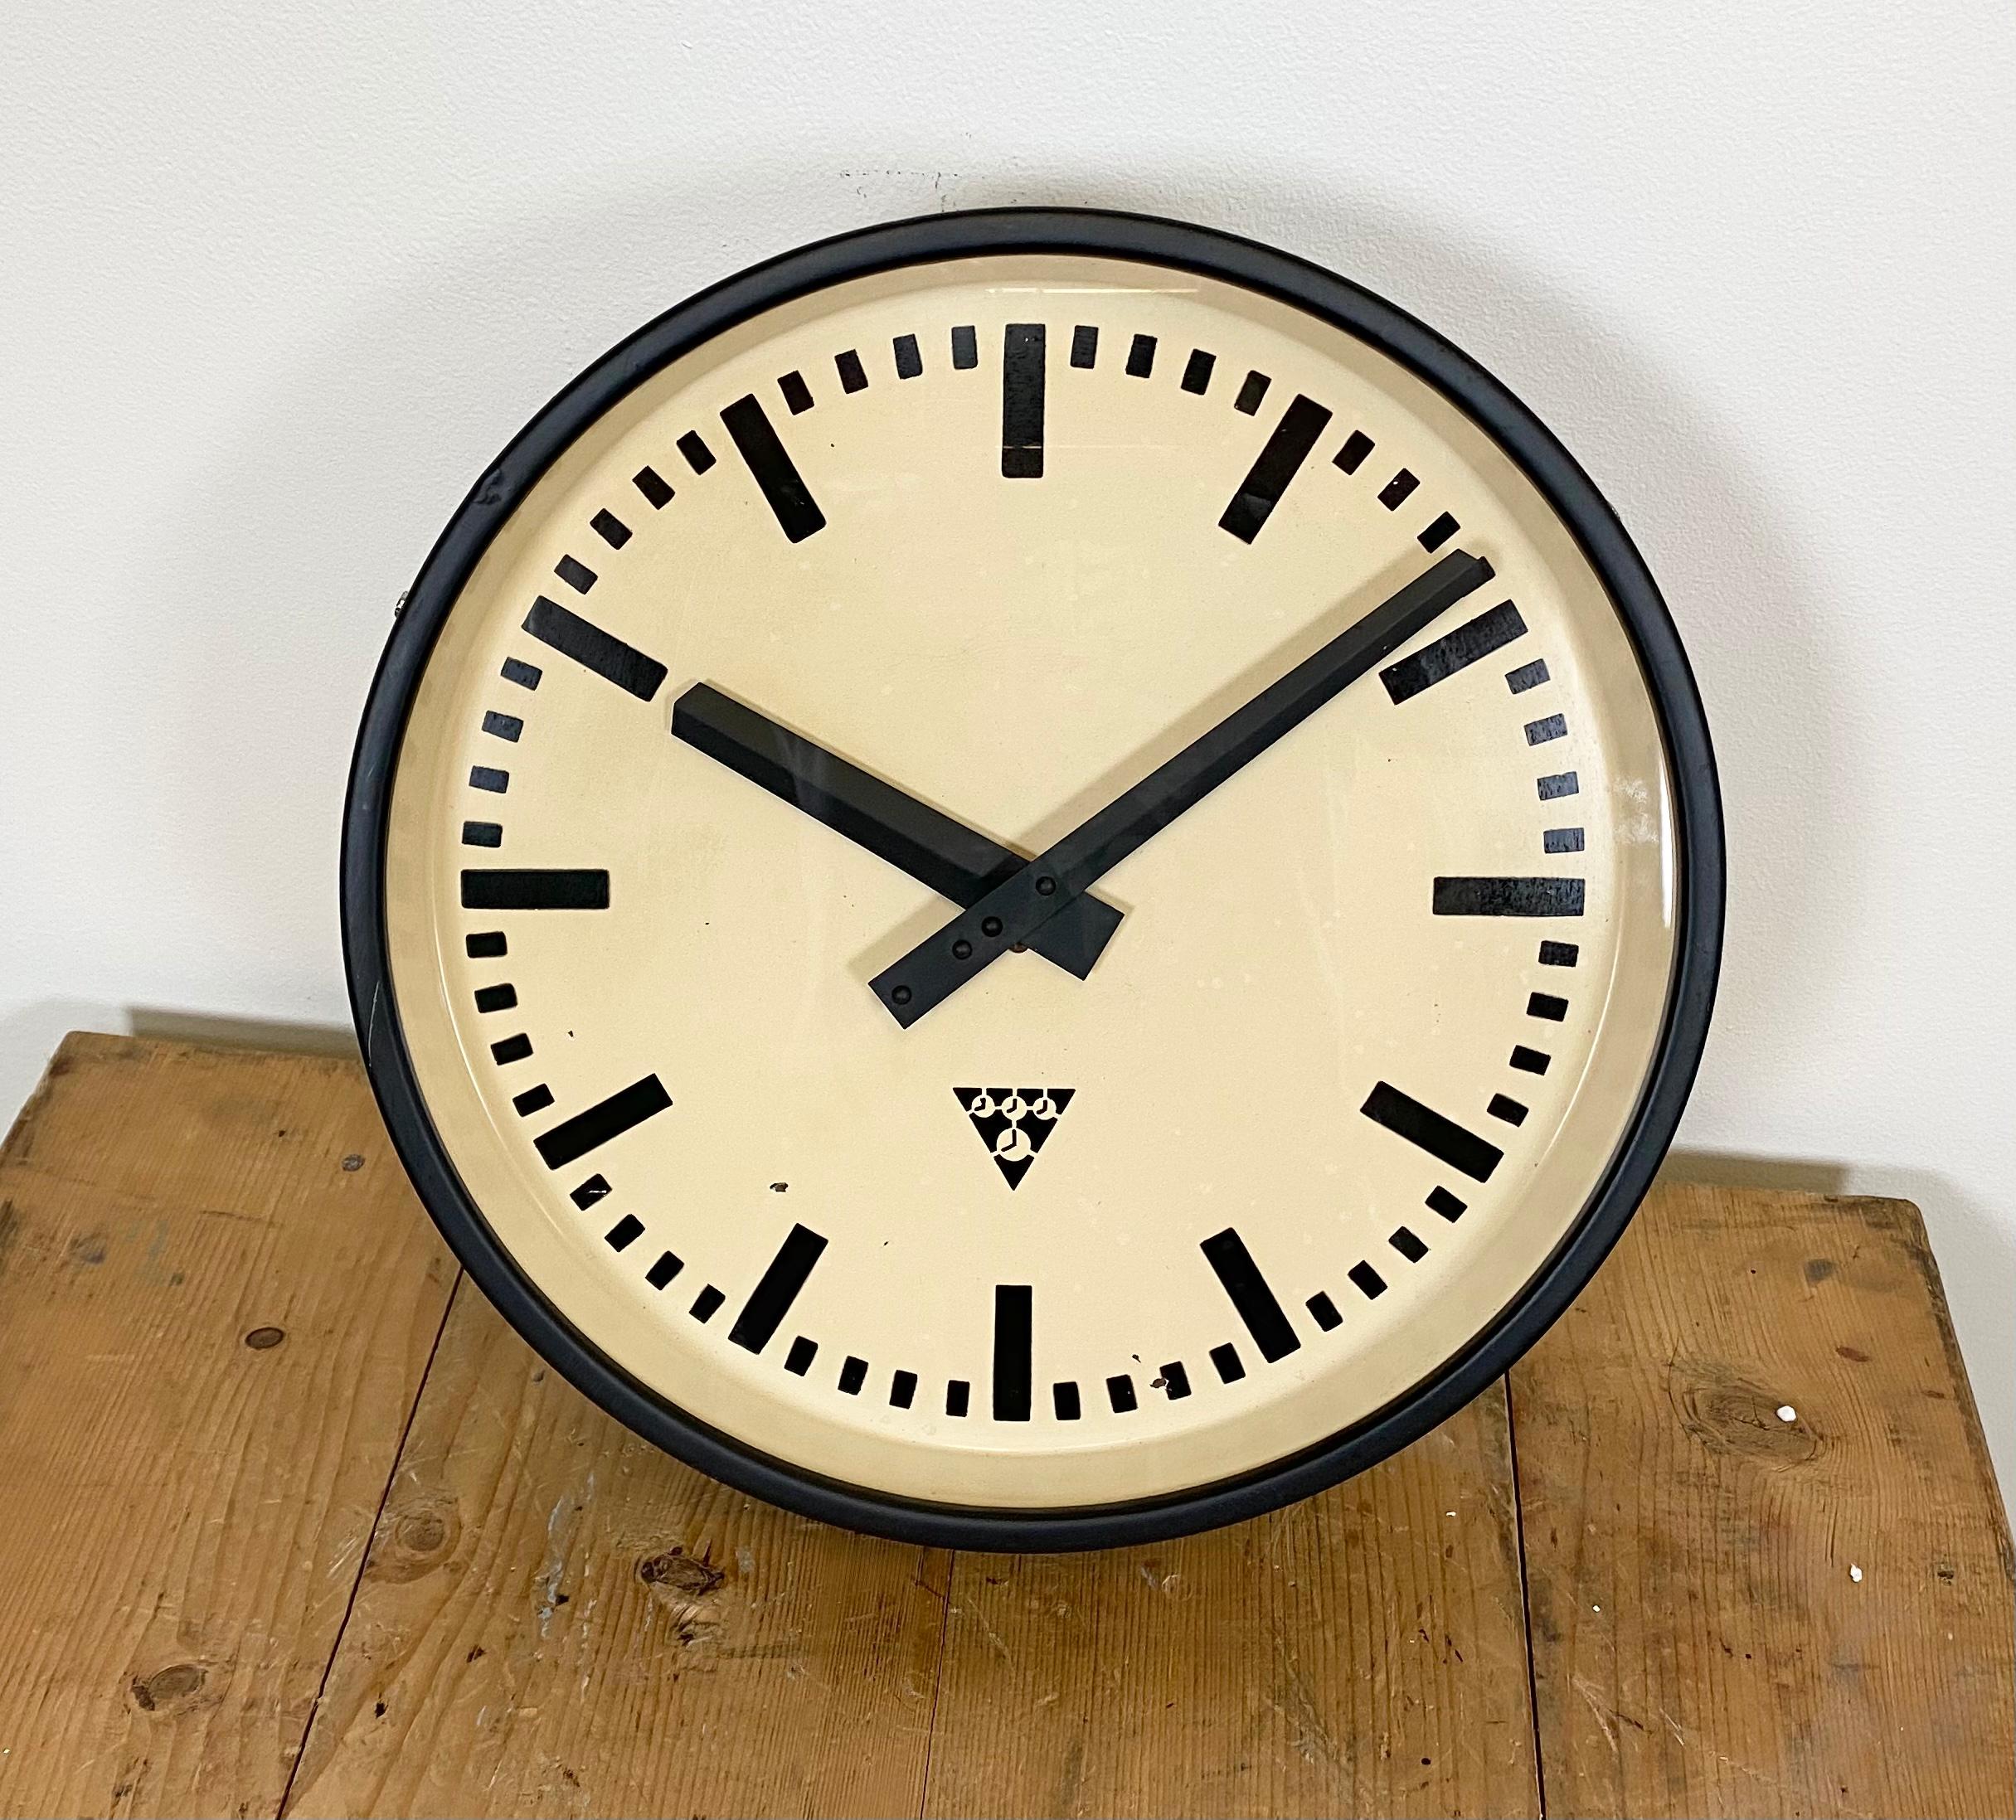 These Pragotron wall clock was made in former Czechoslovakia during the 1960s. Features a black iron frame, metal dial, aluminium hands and clear glass cover. The piece has been converted into a battery-powered clockwork and requires only one